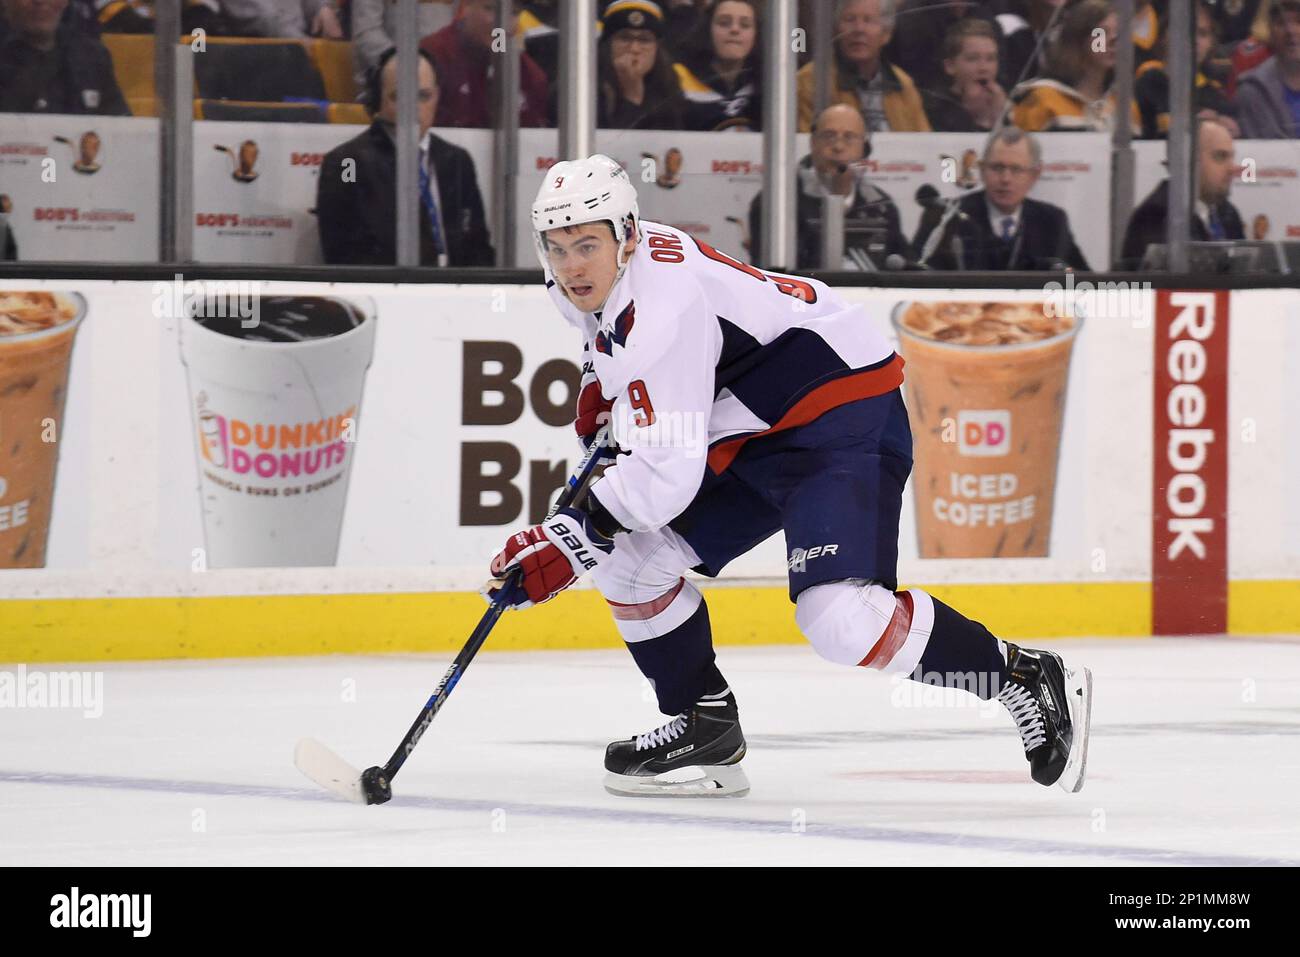 For Bruins defenseman Dmitry Orlov, the Russian Five opened his